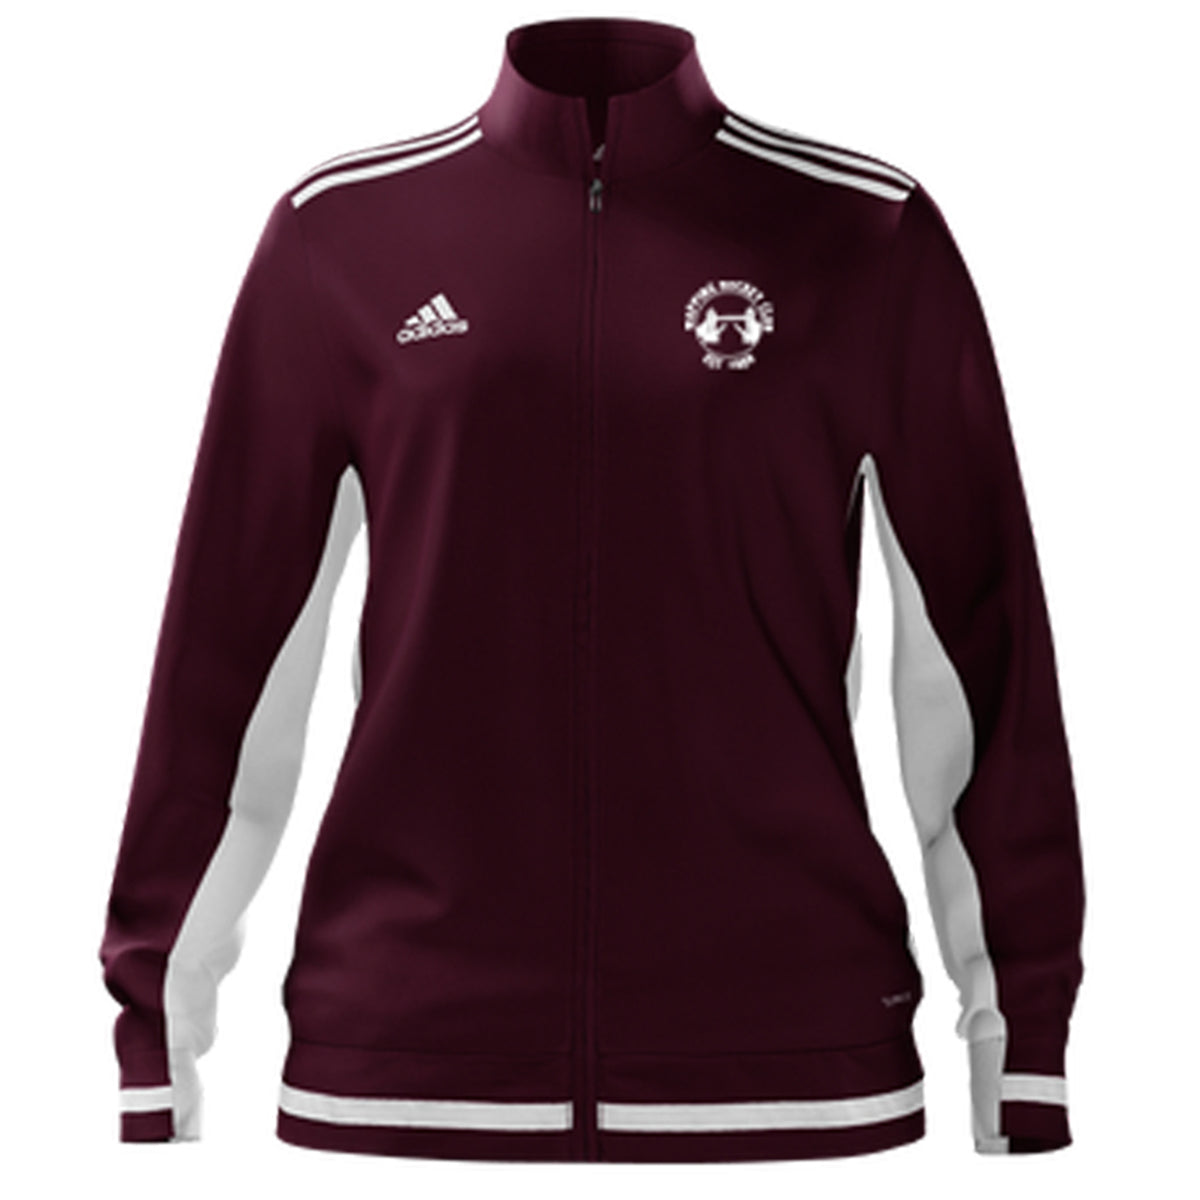 Wapping HC Ladies Miteam Woven Jacket 2022